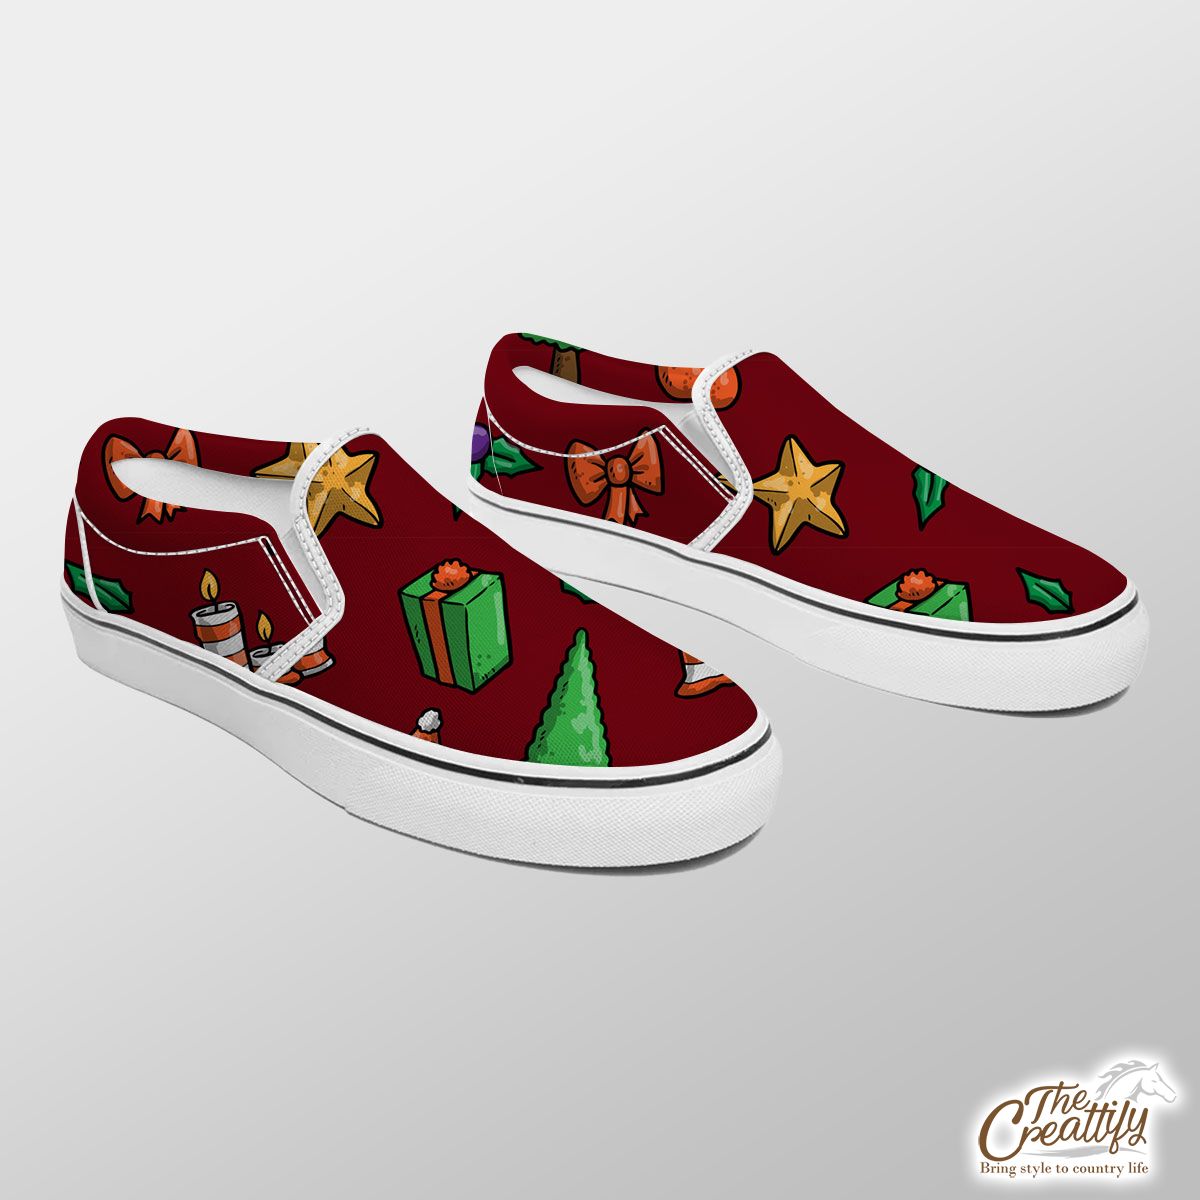 Christmas Gifts, Candles, Pine Tree And Snowman FaceWith Santa Hat Red Pattern Slip On Sneakers